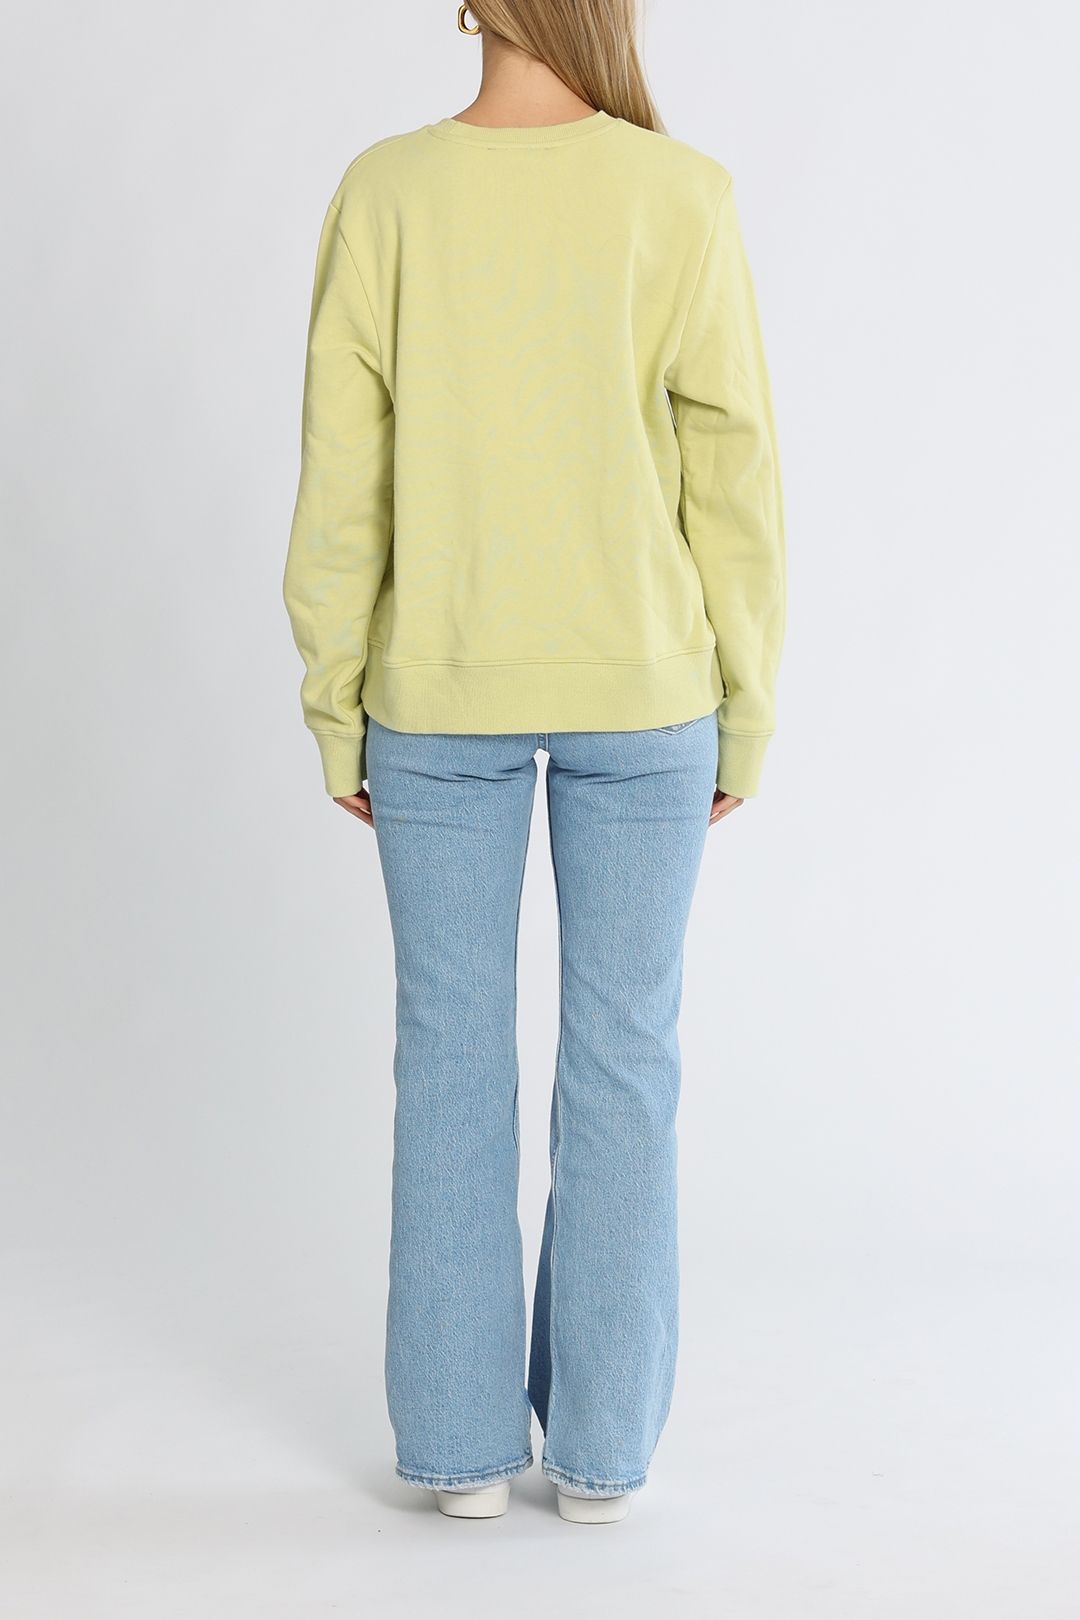 C&M Camilla and Marc Auburn Logo Sweater Sour Lemon Relaxed Fit